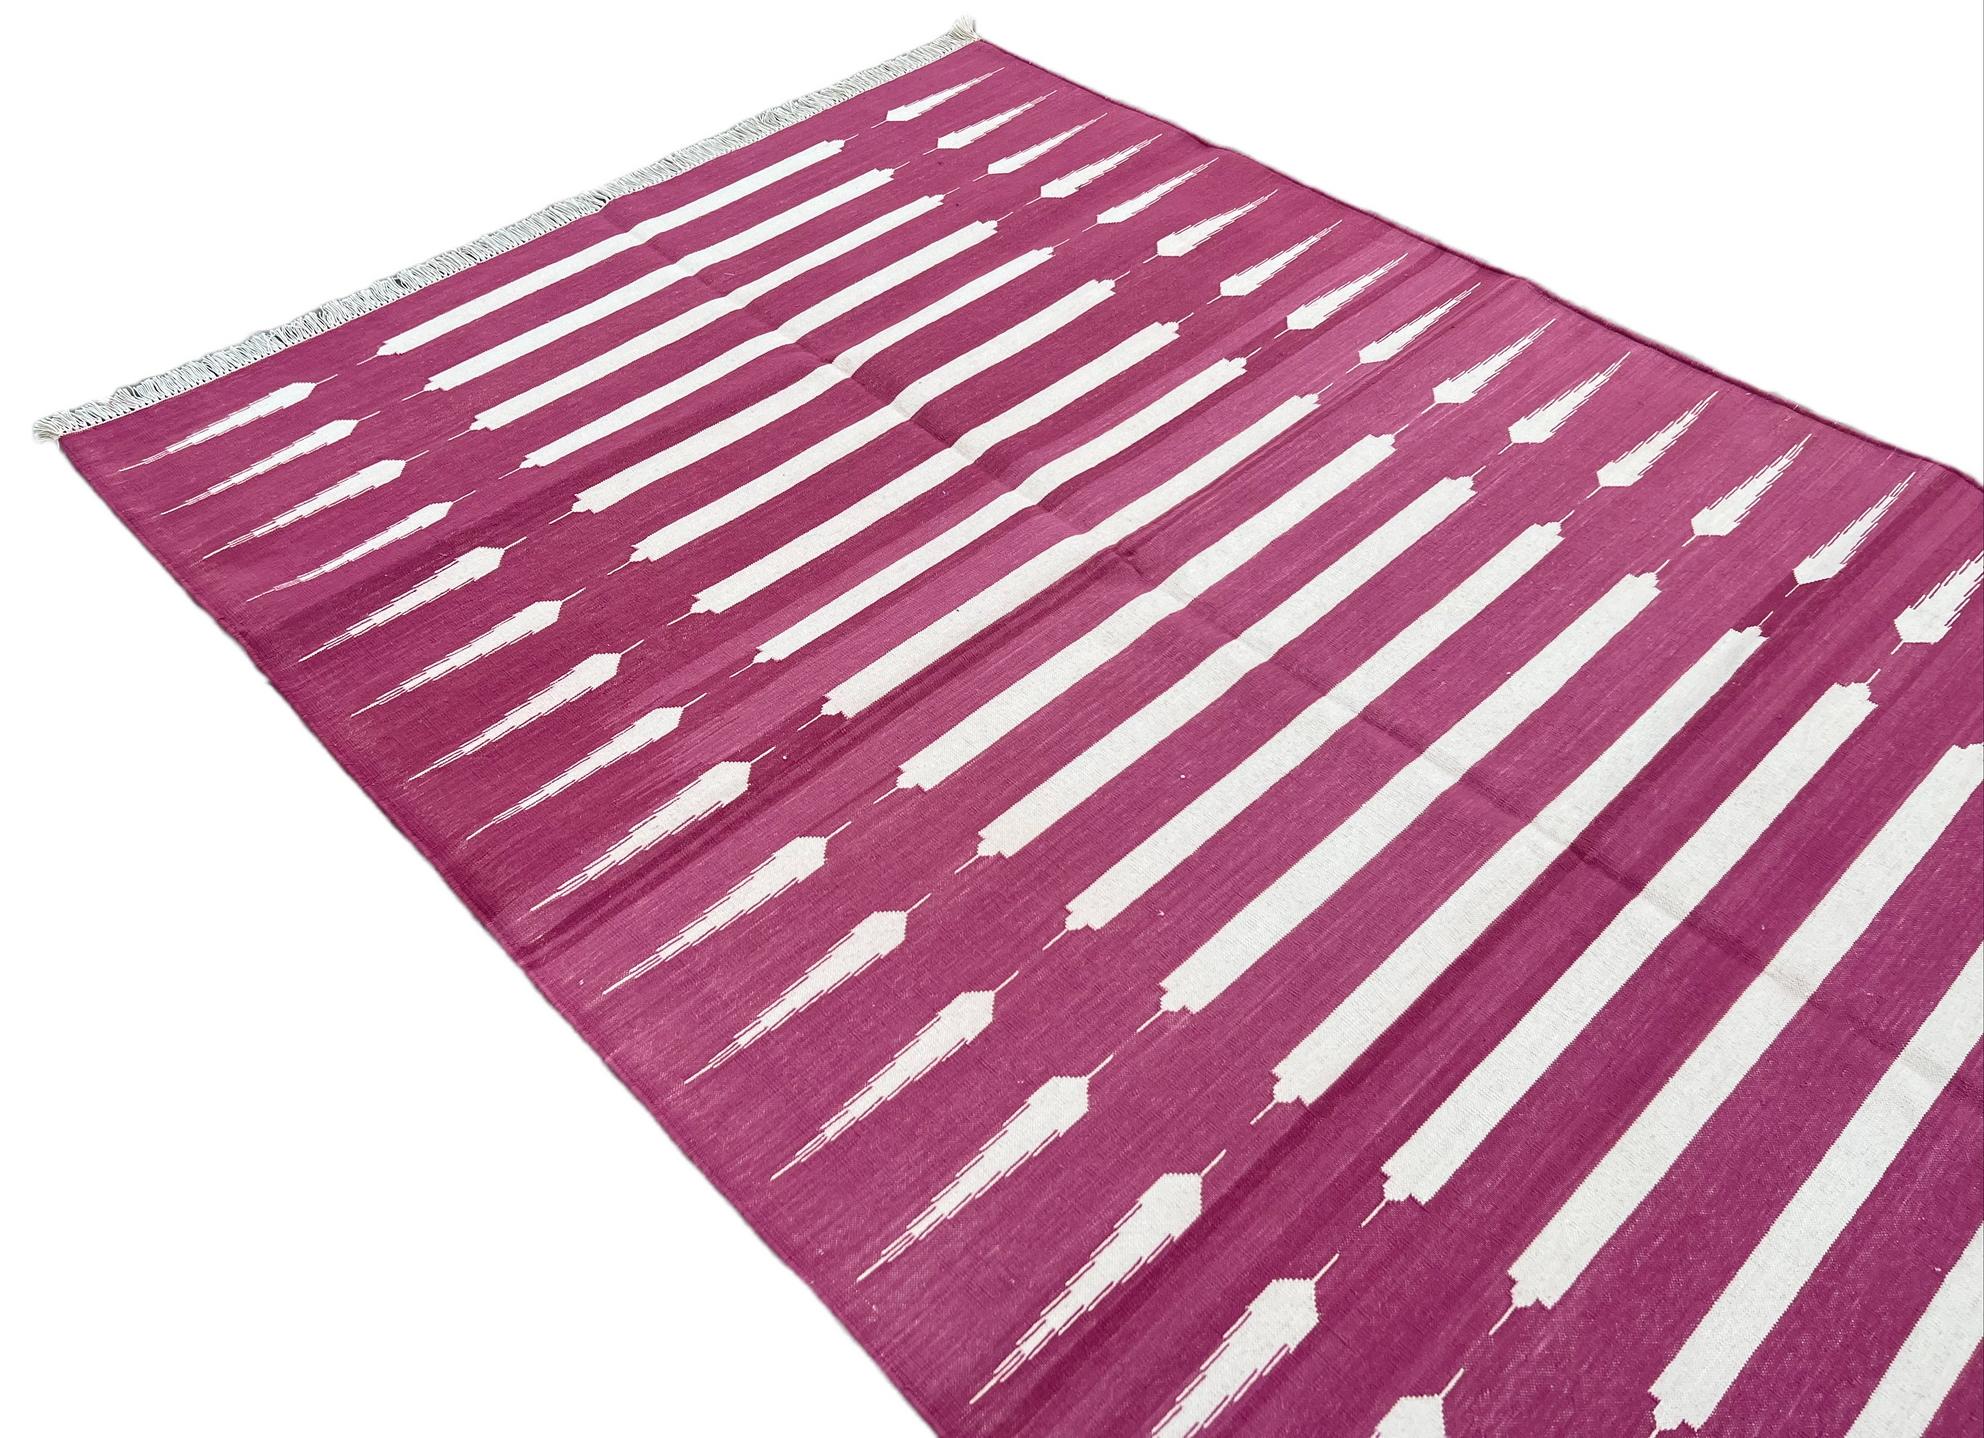 Handmade Cotton Area Flat Weave Rug, 4x6 Pink And White Striped Indian Dhurrie In New Condition For Sale In Jaipur, IN